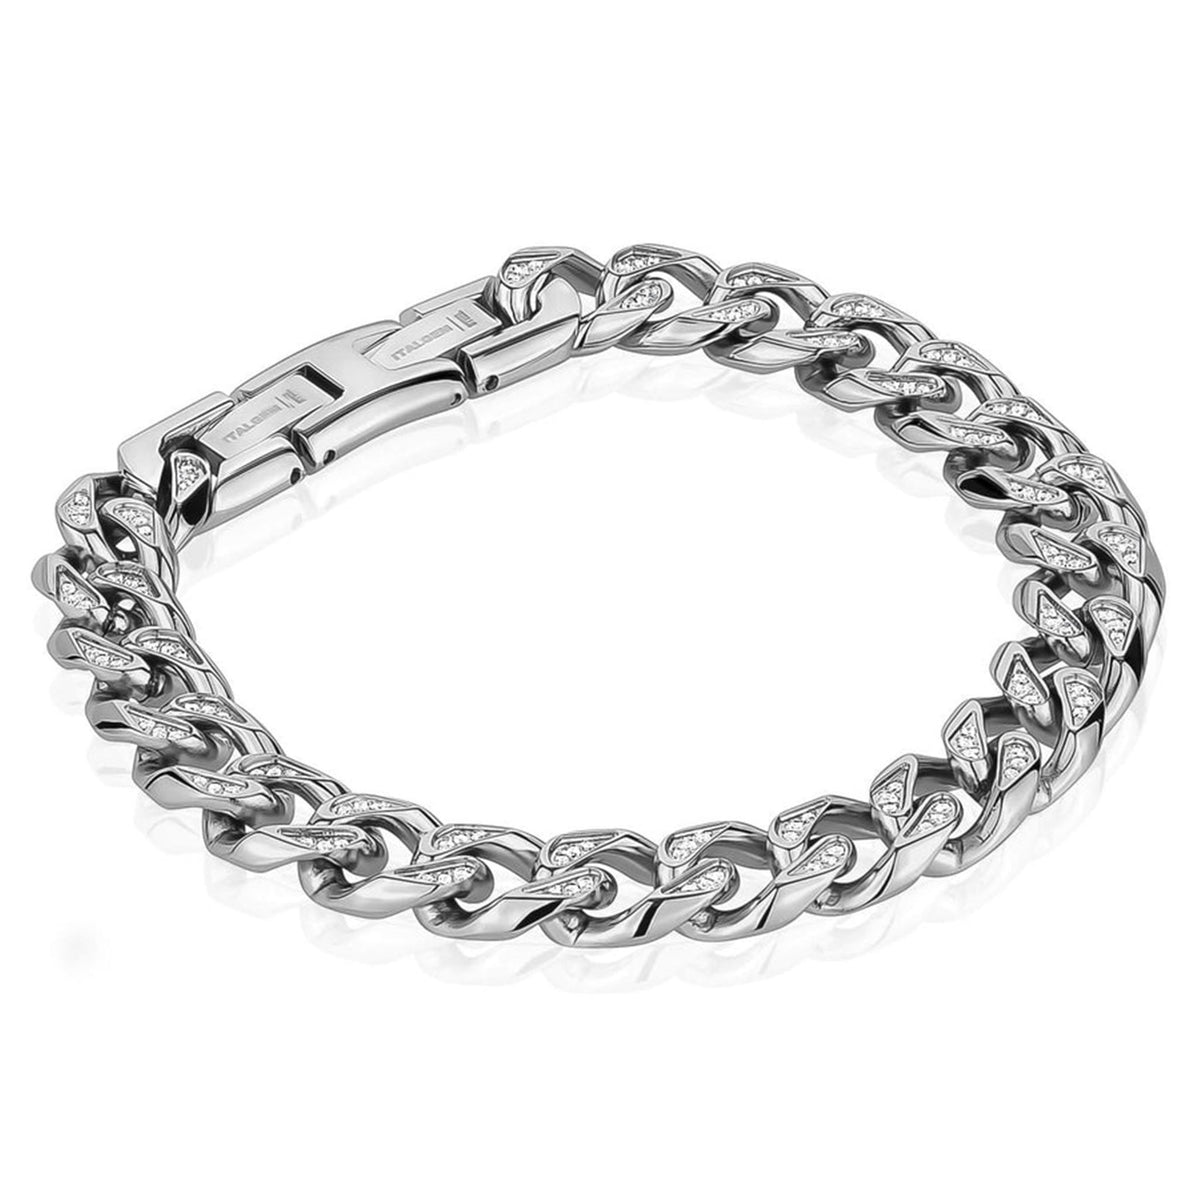 Italgem Stainless Steel Curb Link Bracelet with Cubic Zirconia